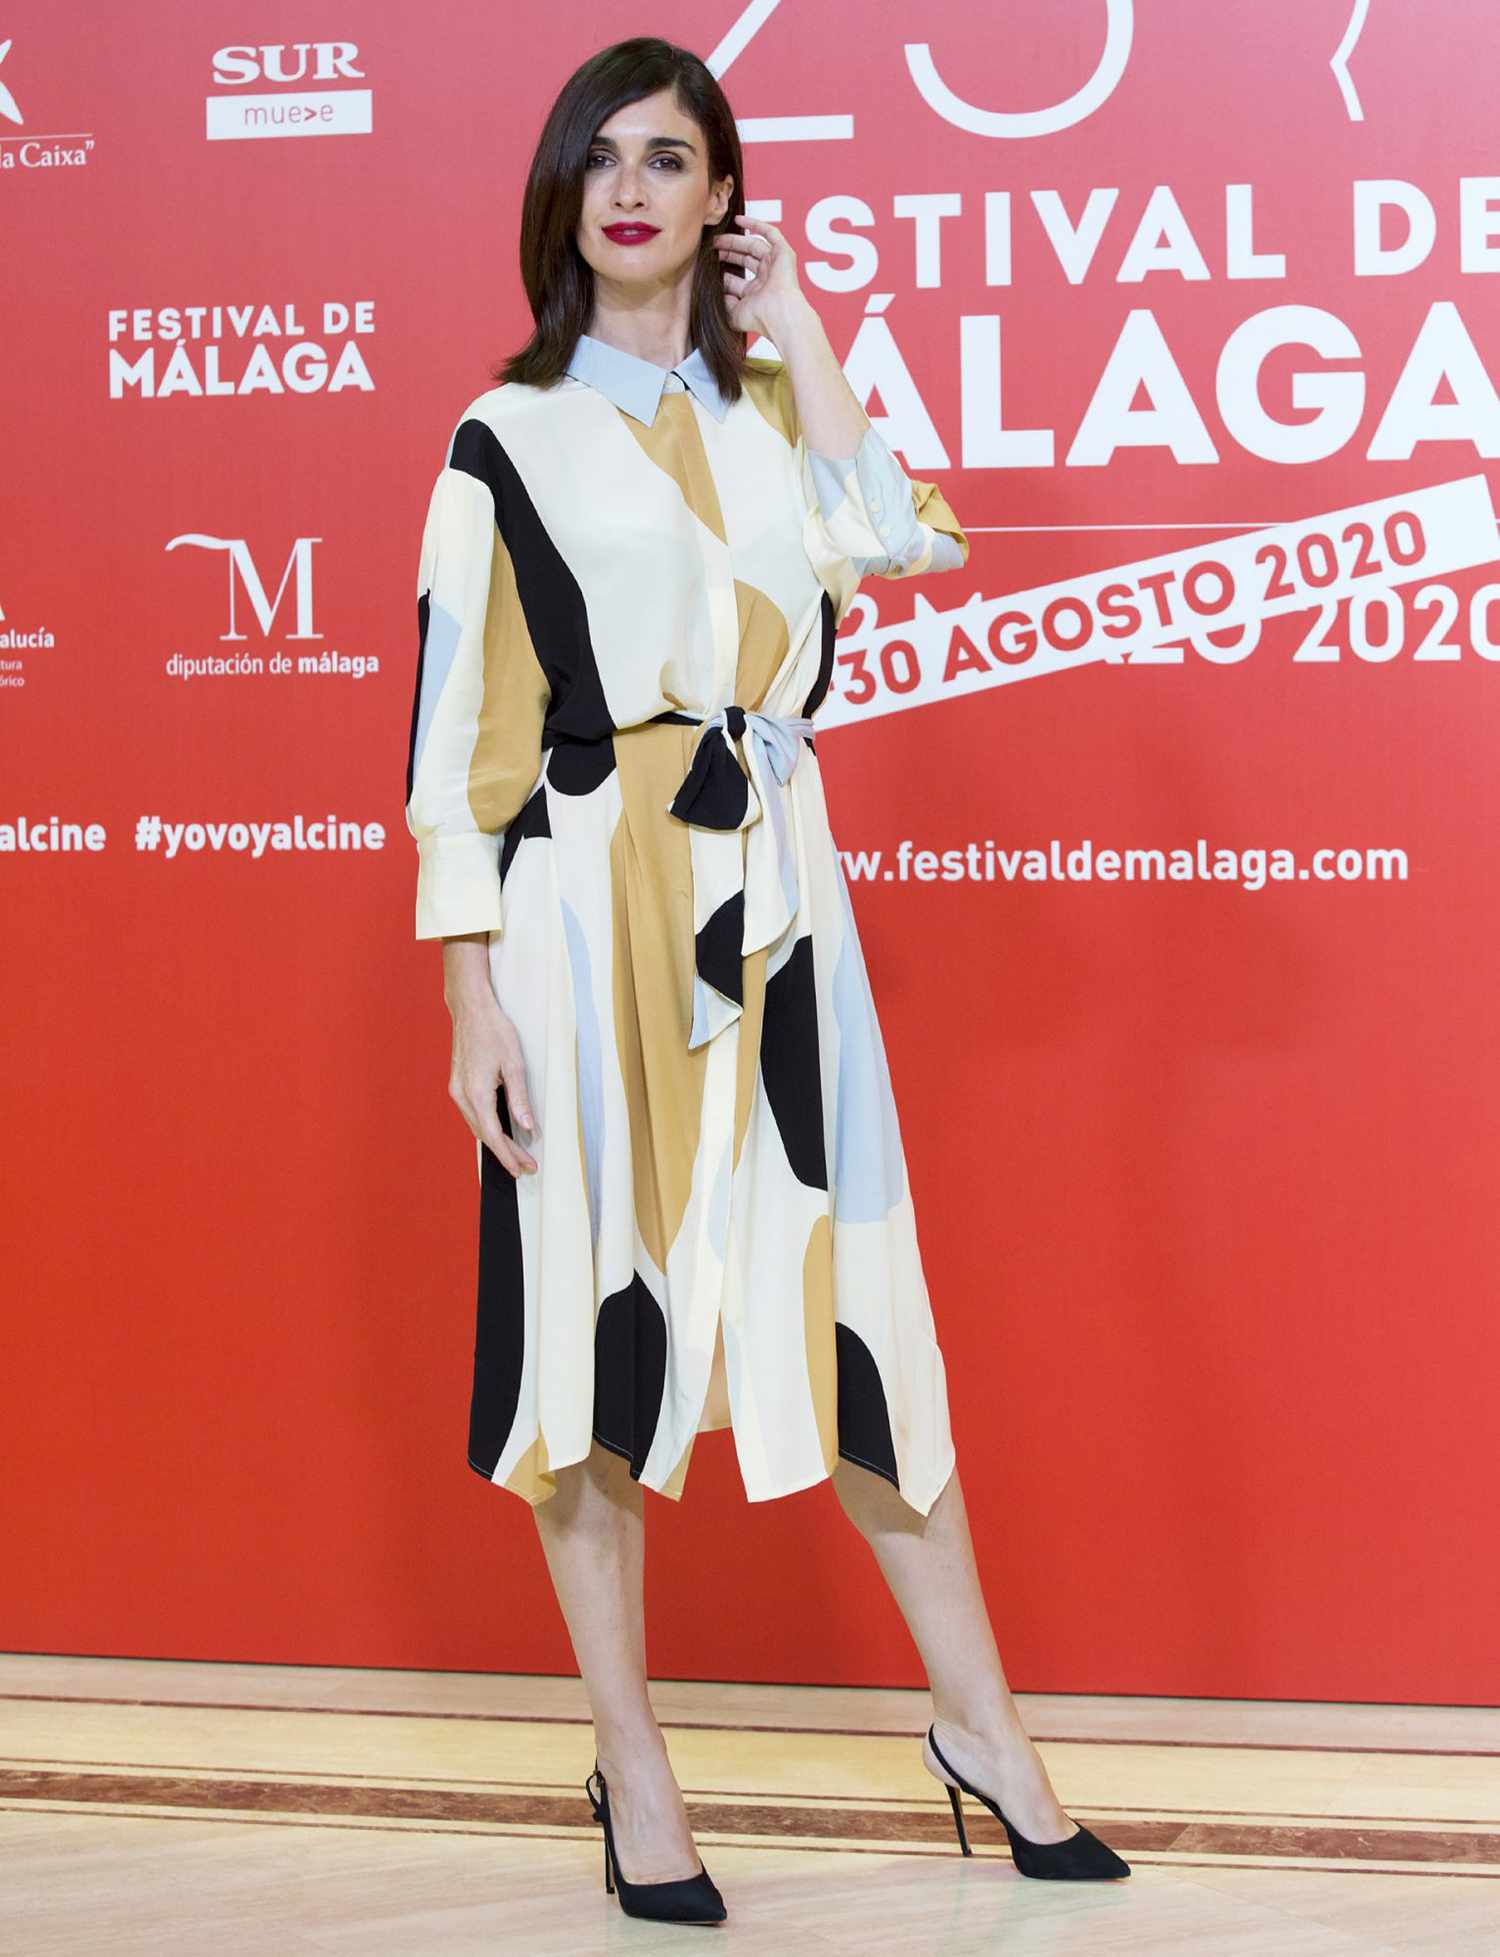 Paz Vega attends the photocall of the third day of the Malaga Film Festival 2020 on August 23, 2020 in Malaga, Spain